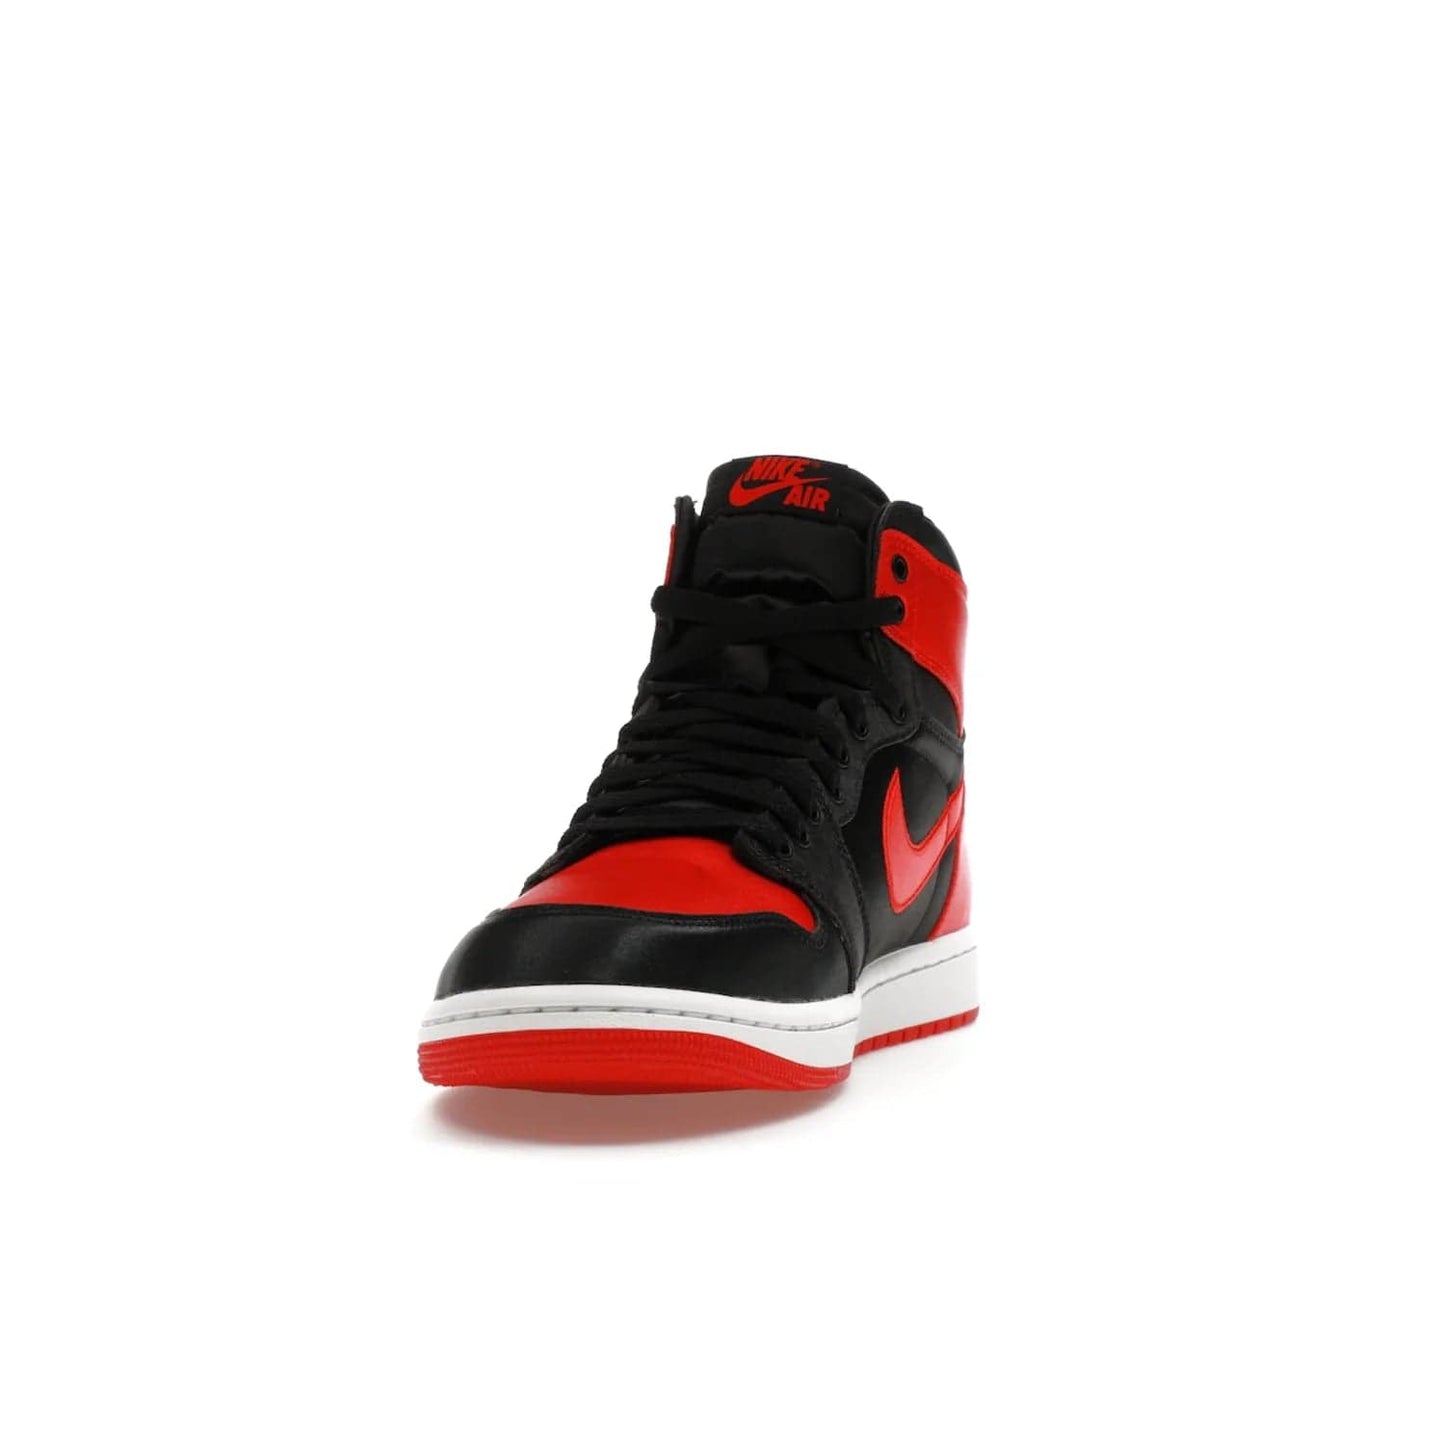 Jordan 1 Retro High OG Satin Bred (Women's) - Image 12 - Only at www.BallersClubKickz.com - Introducing the Jordan 1 Retro High OG Satin Bred (Women's). Luxe satin finish, contrasting hues & classic accents. Trending sneakers symbolizing timelessness & heritage. Make a bold statement with this iconic shoe. Available October 4, 2023.